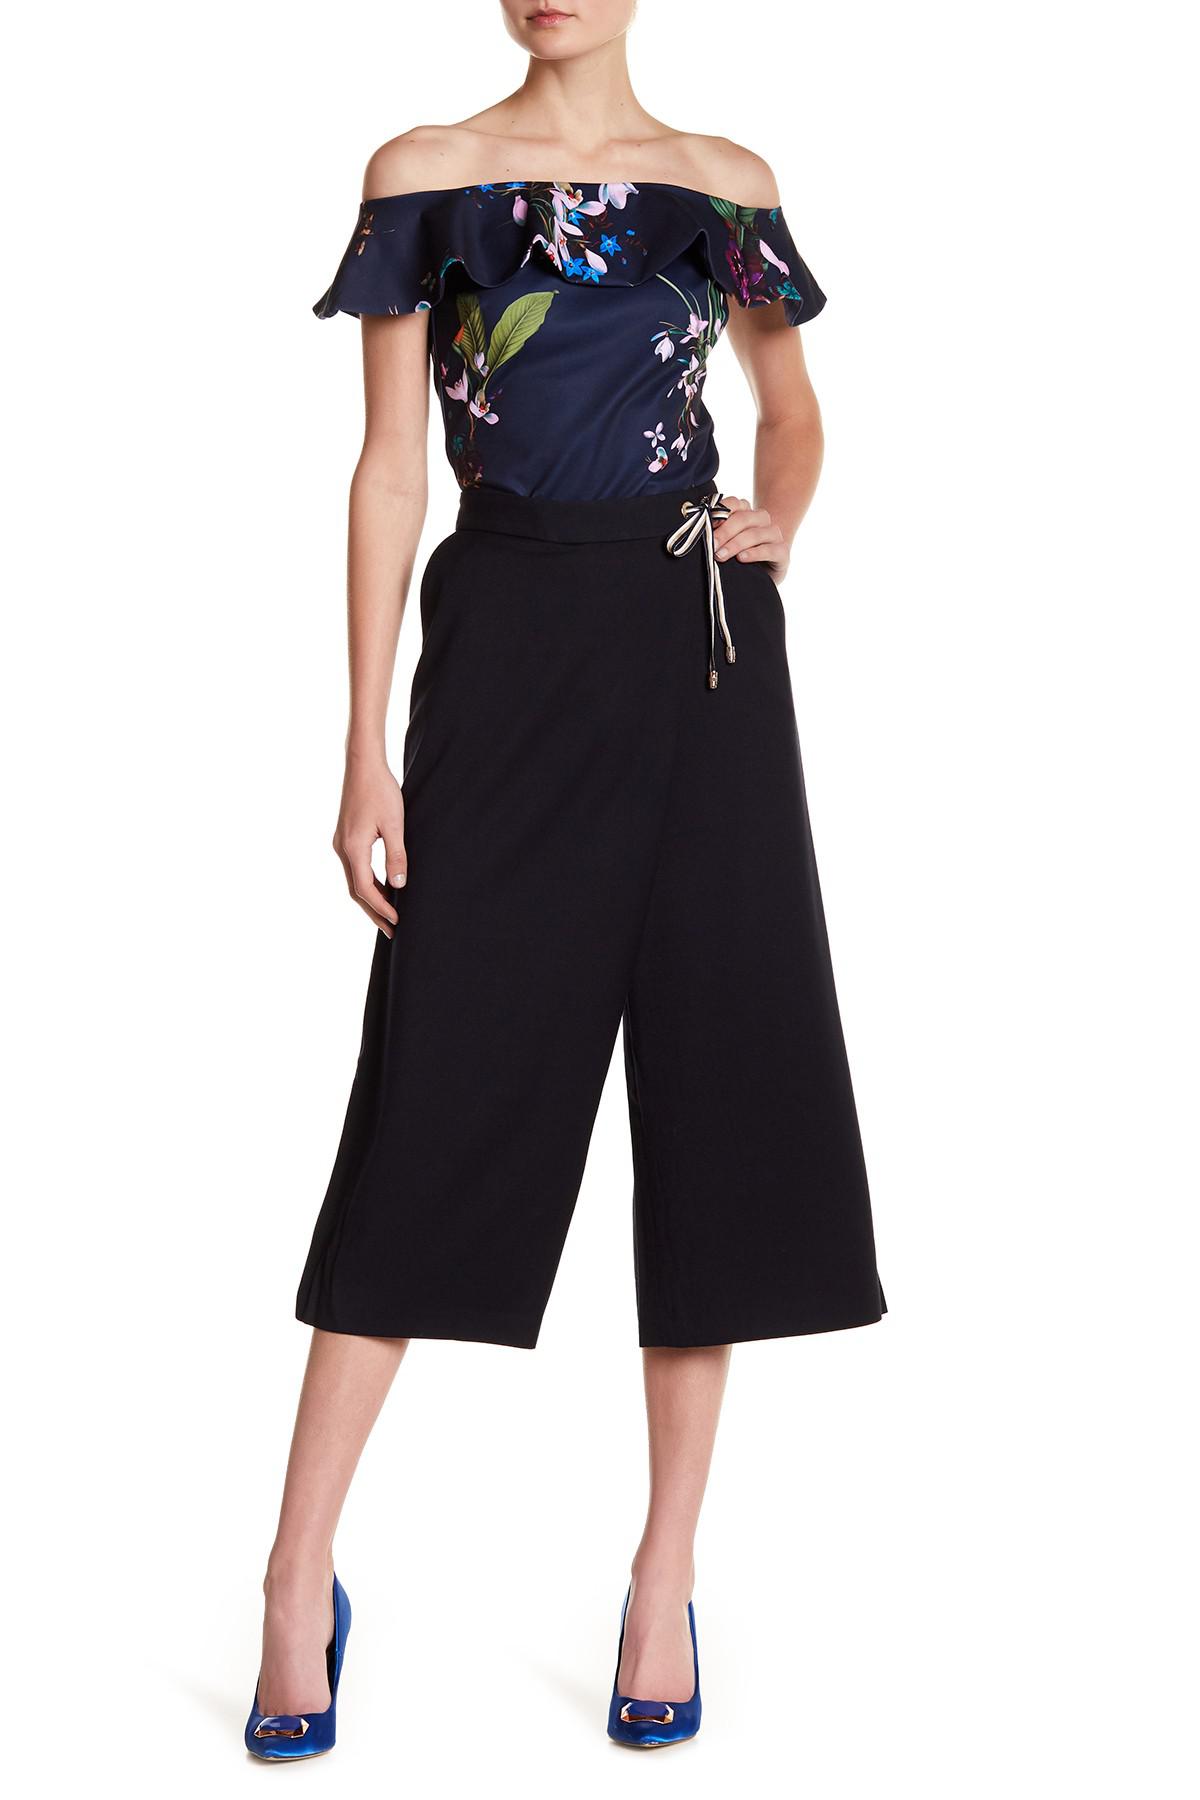 Lyst - Ted Baker Rayon Crossover Culottes in Blue